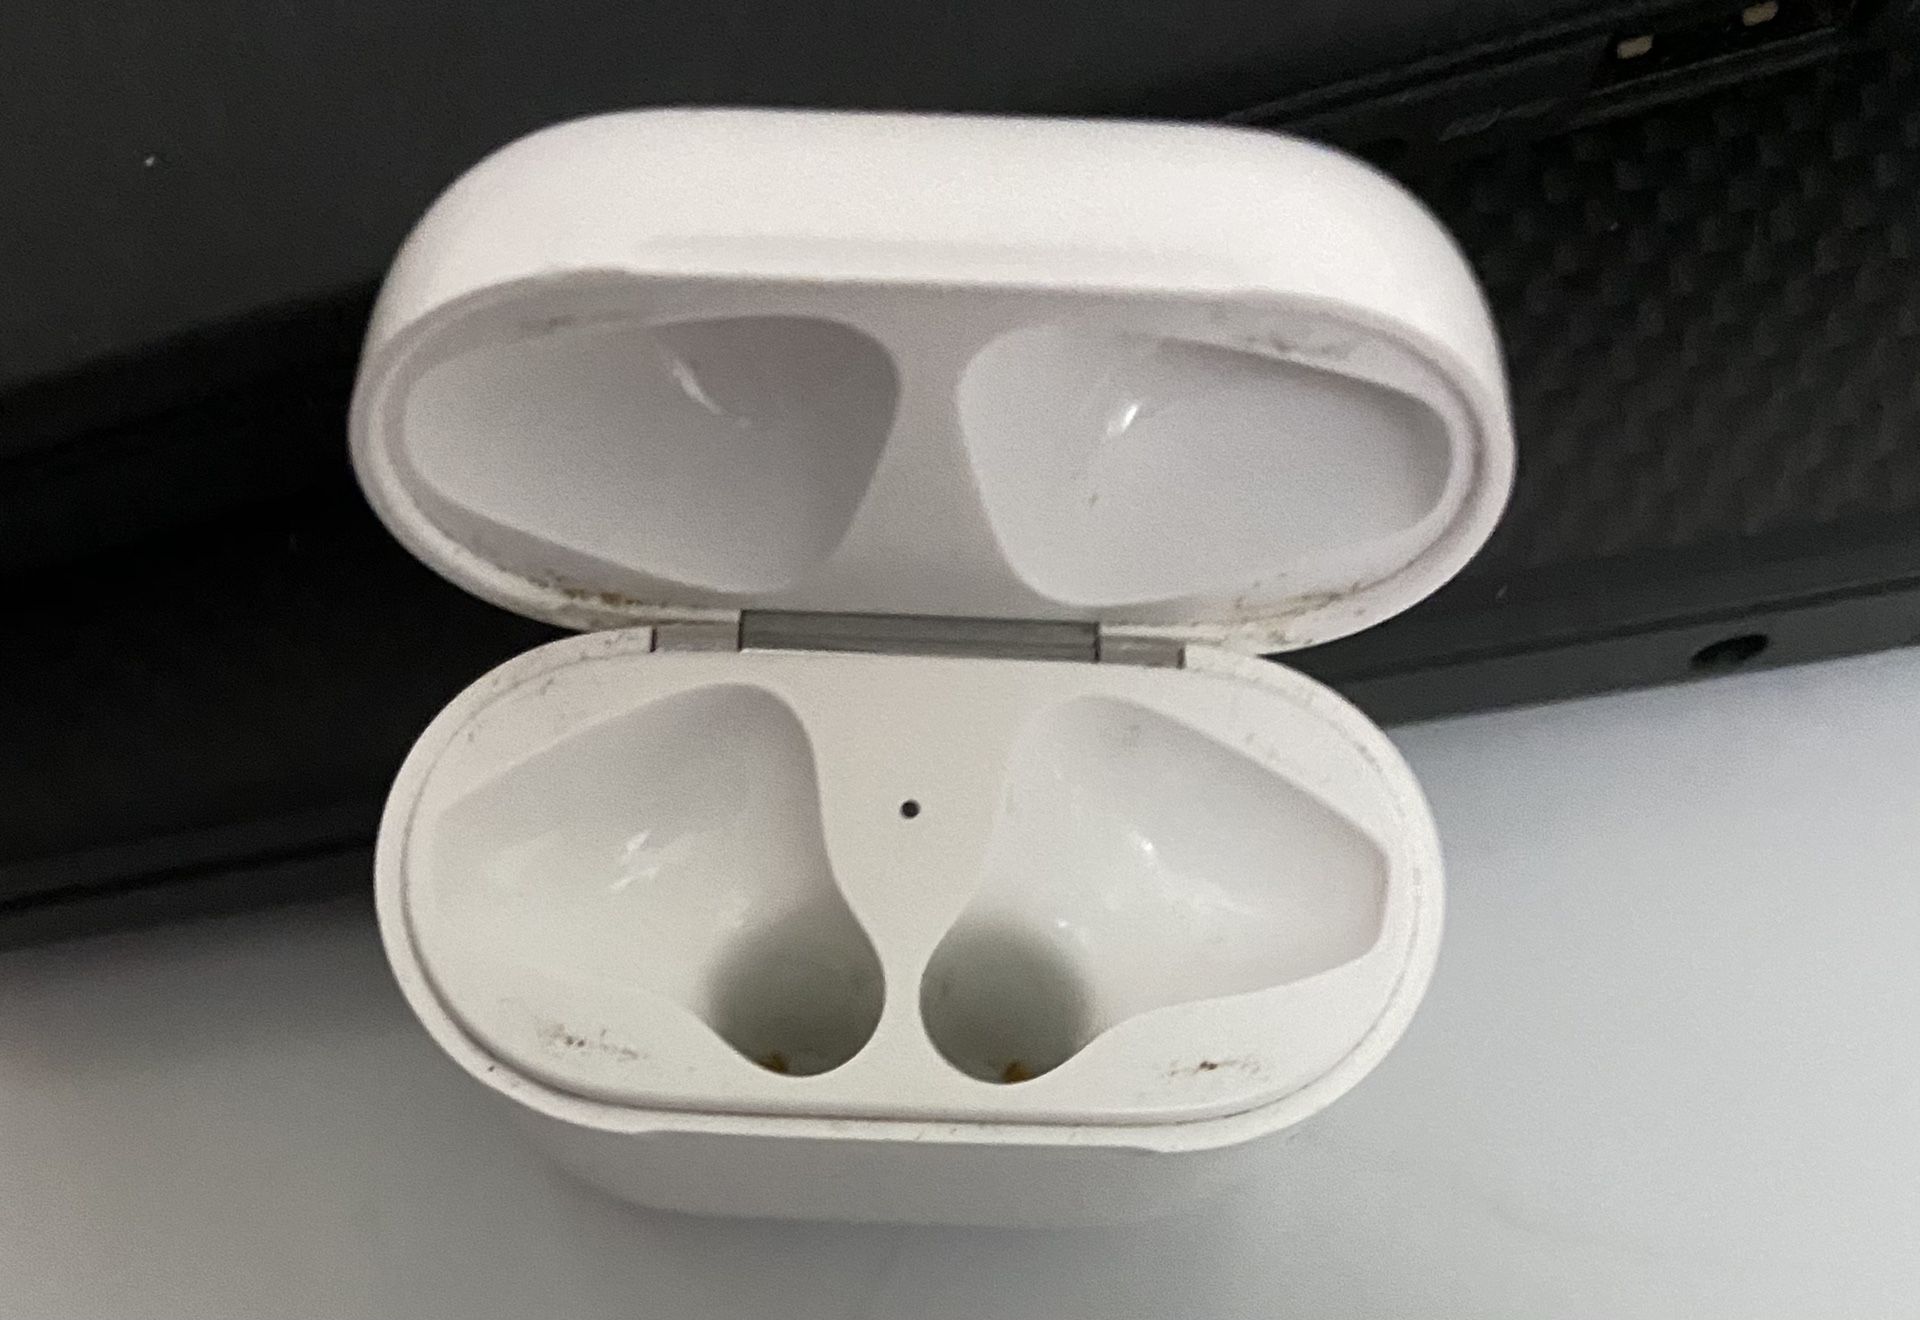 Apple Airpod charging case only